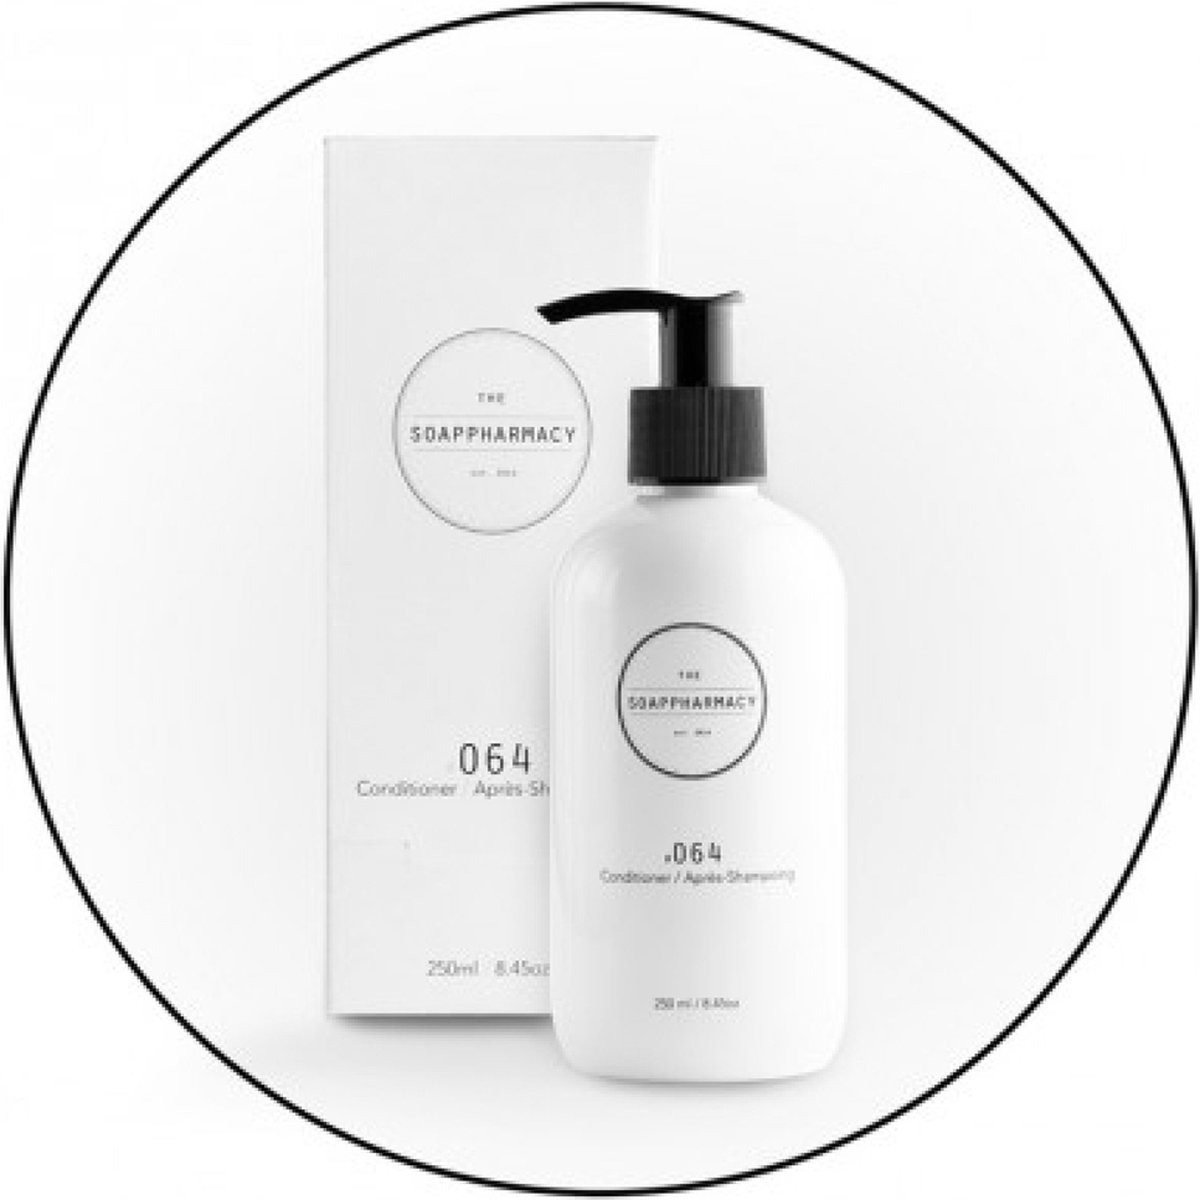 The Soappharmacy #064 Conditioner